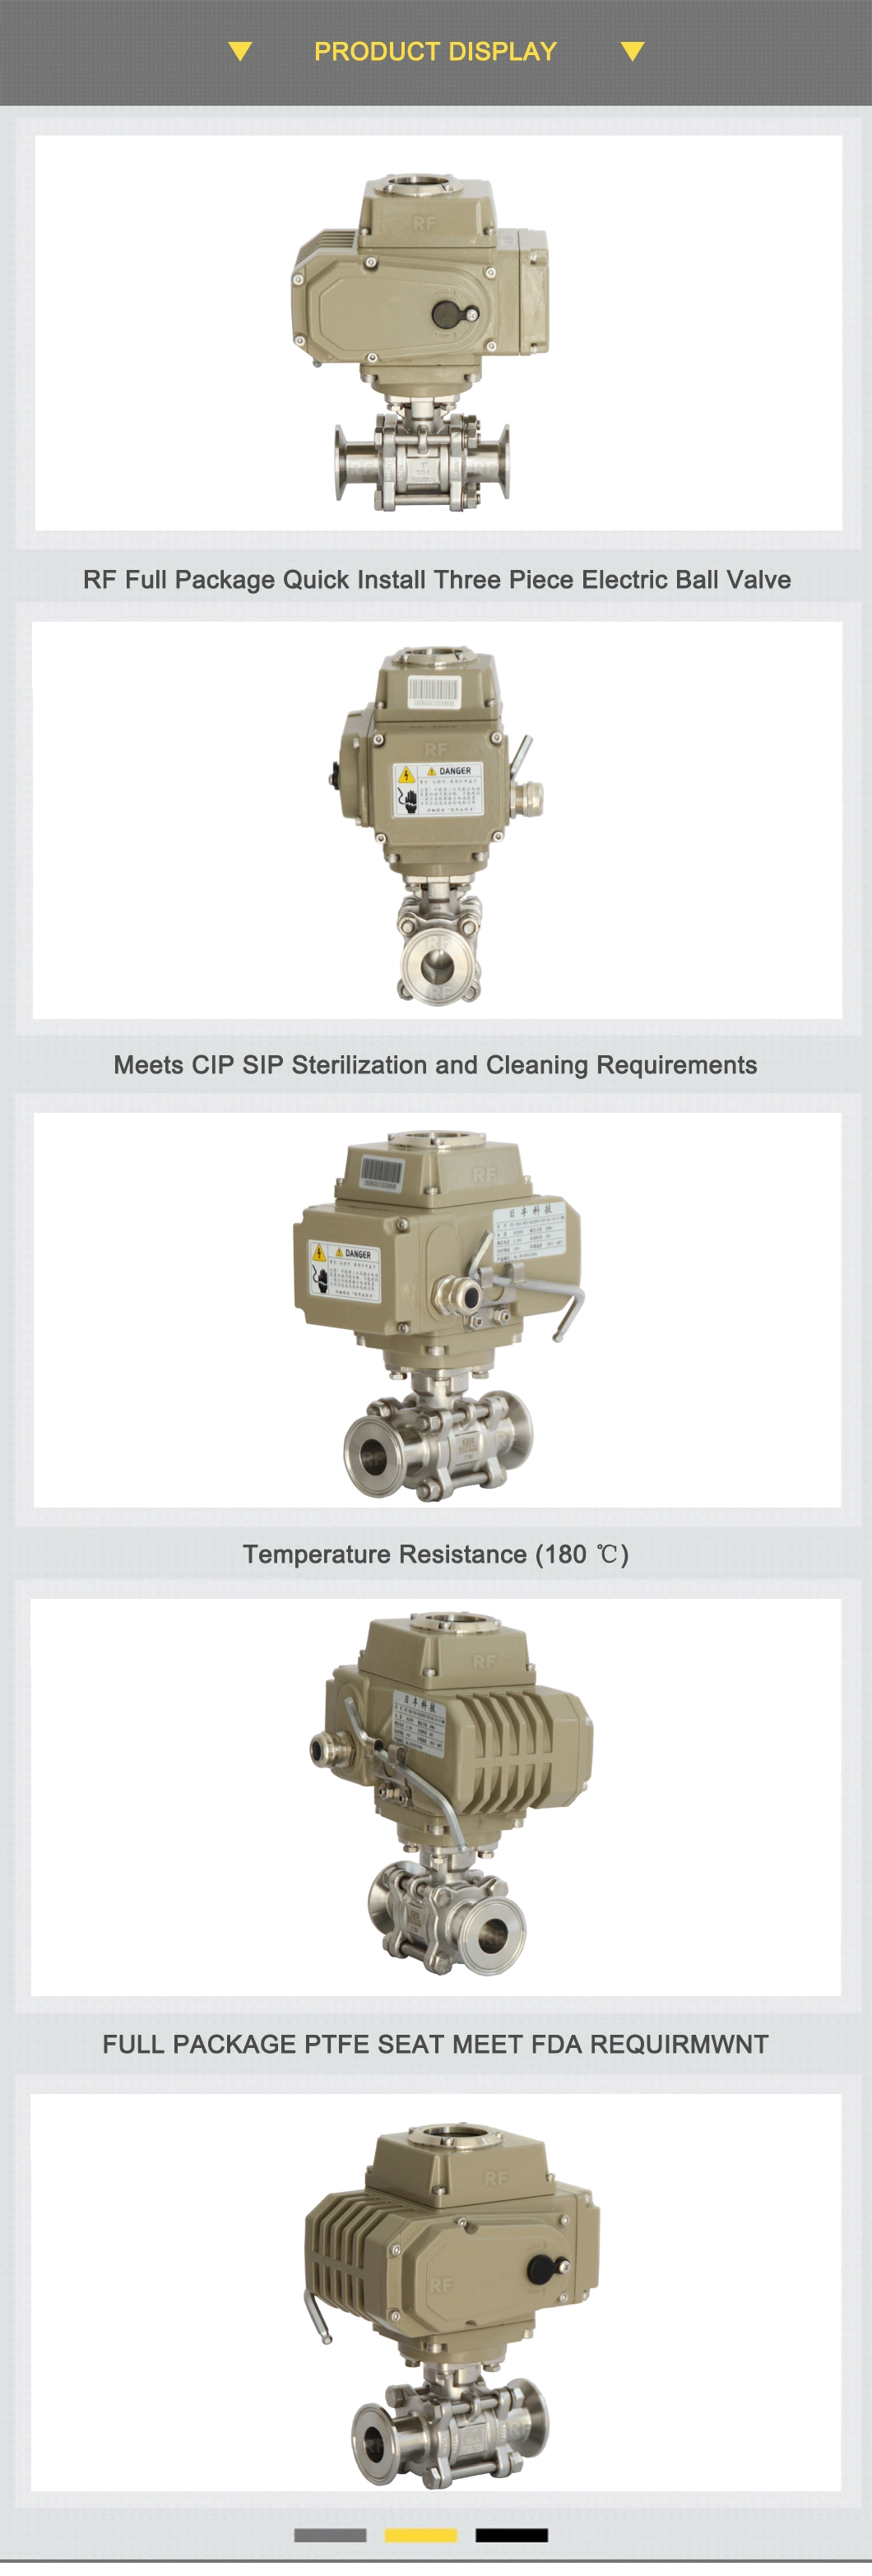 RF Full Package Quick Install Three Piece Electric Ball Valve